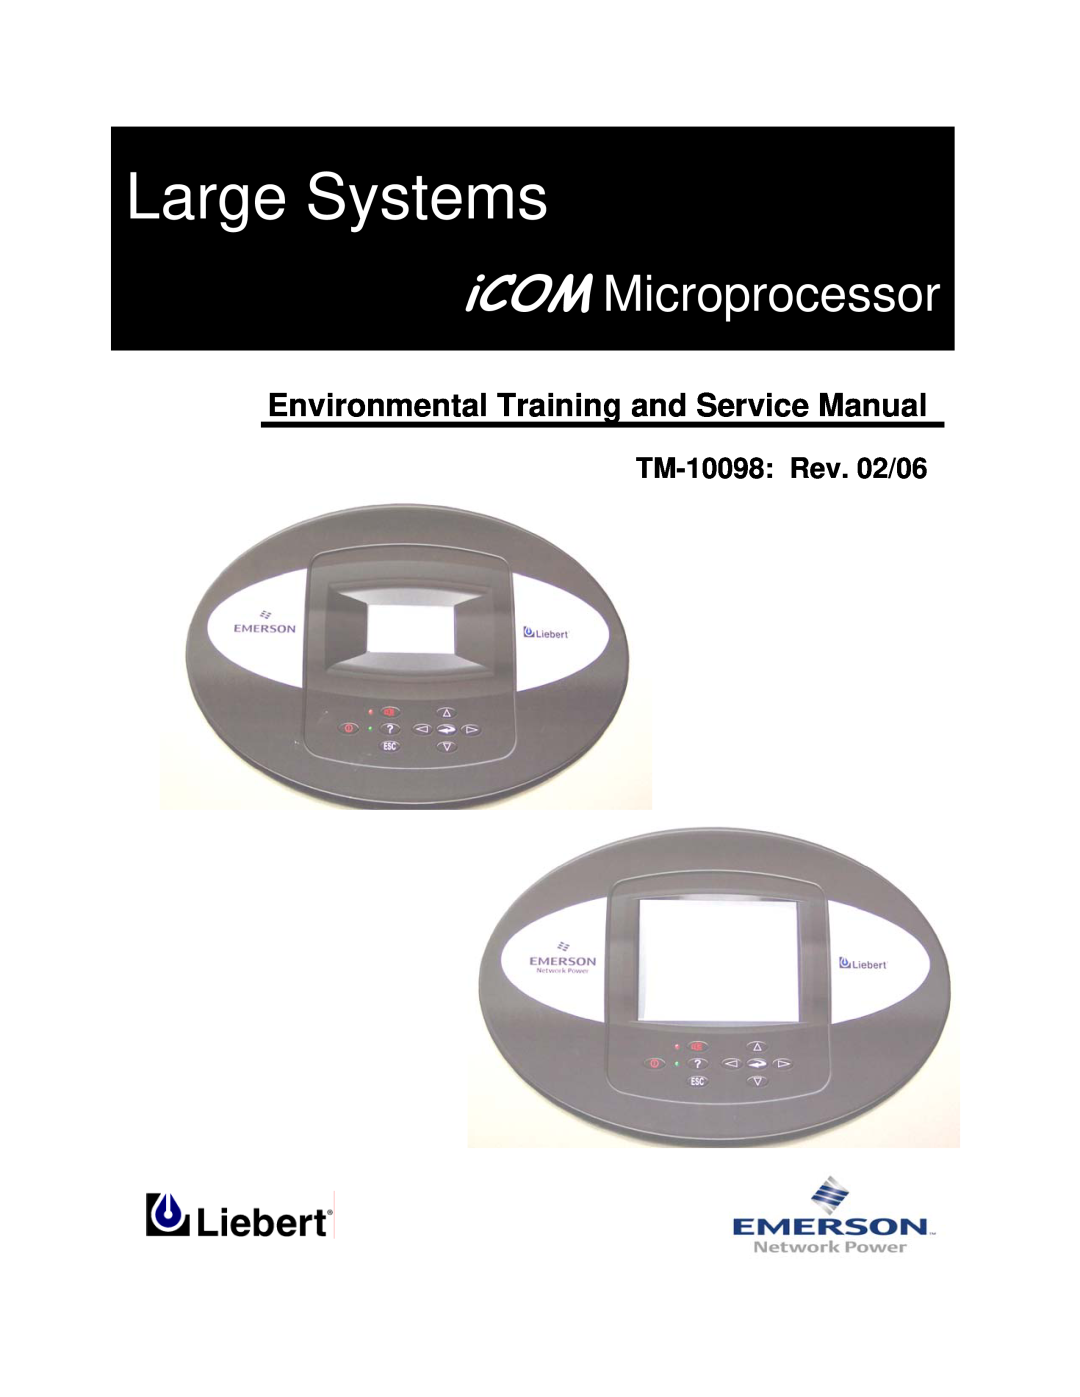 Liebert service manual Environmental Training and Service Manual, TM-10098:Rev. 02/06, Large Systems 